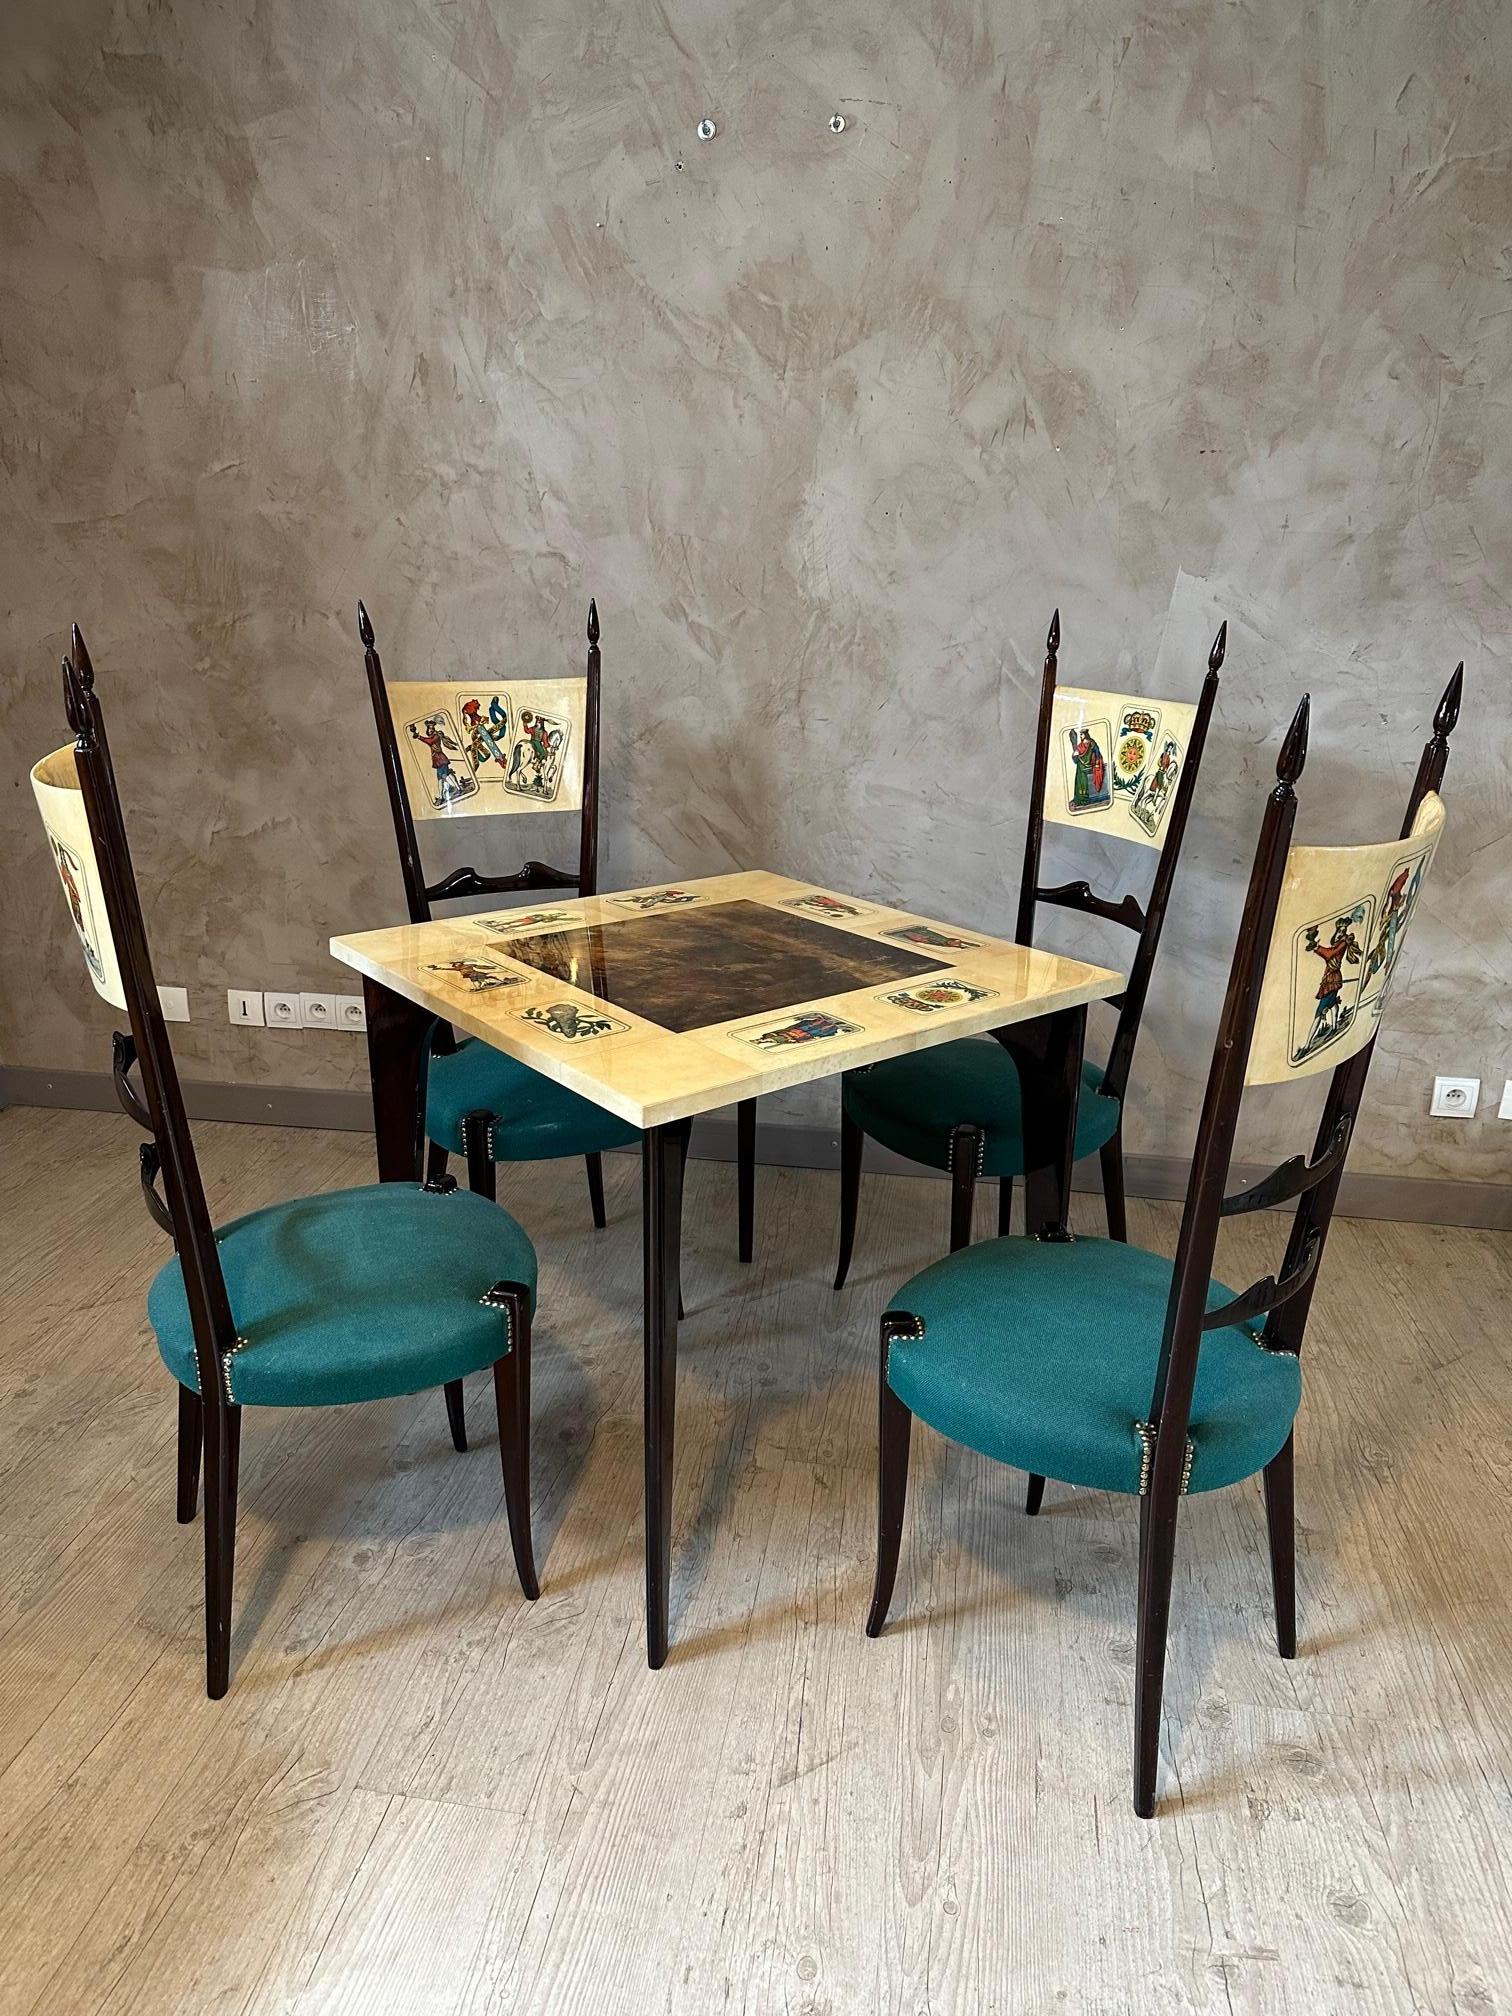 Rare piece! Very beautiful Italian game table Aldo Tura from the 60s in lacquered walnut, sheathed in lacquered goatskin and parchment with its four chairs. Representation of tarot cards.
High-backed chairs (one end of a chair has been glued), green